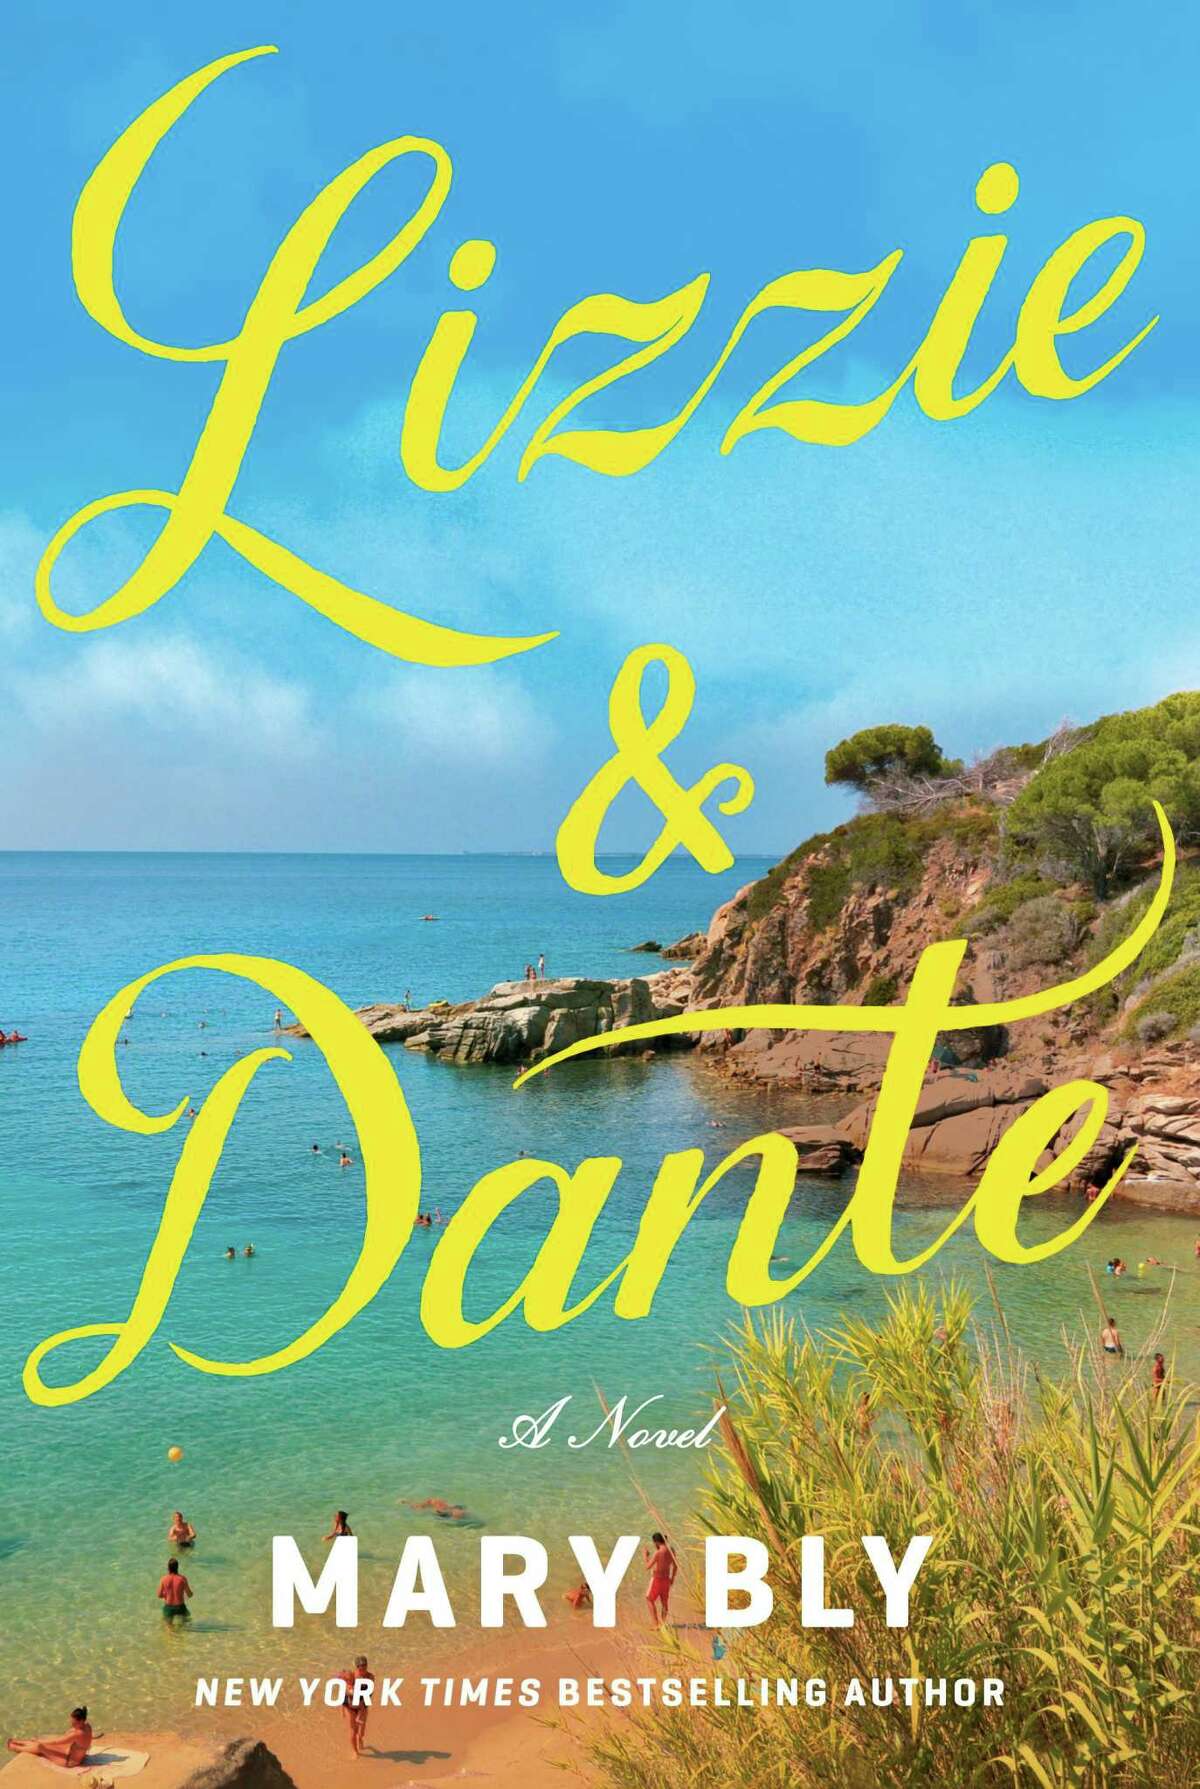 "Lizzie & Dante" by Mary Bly.